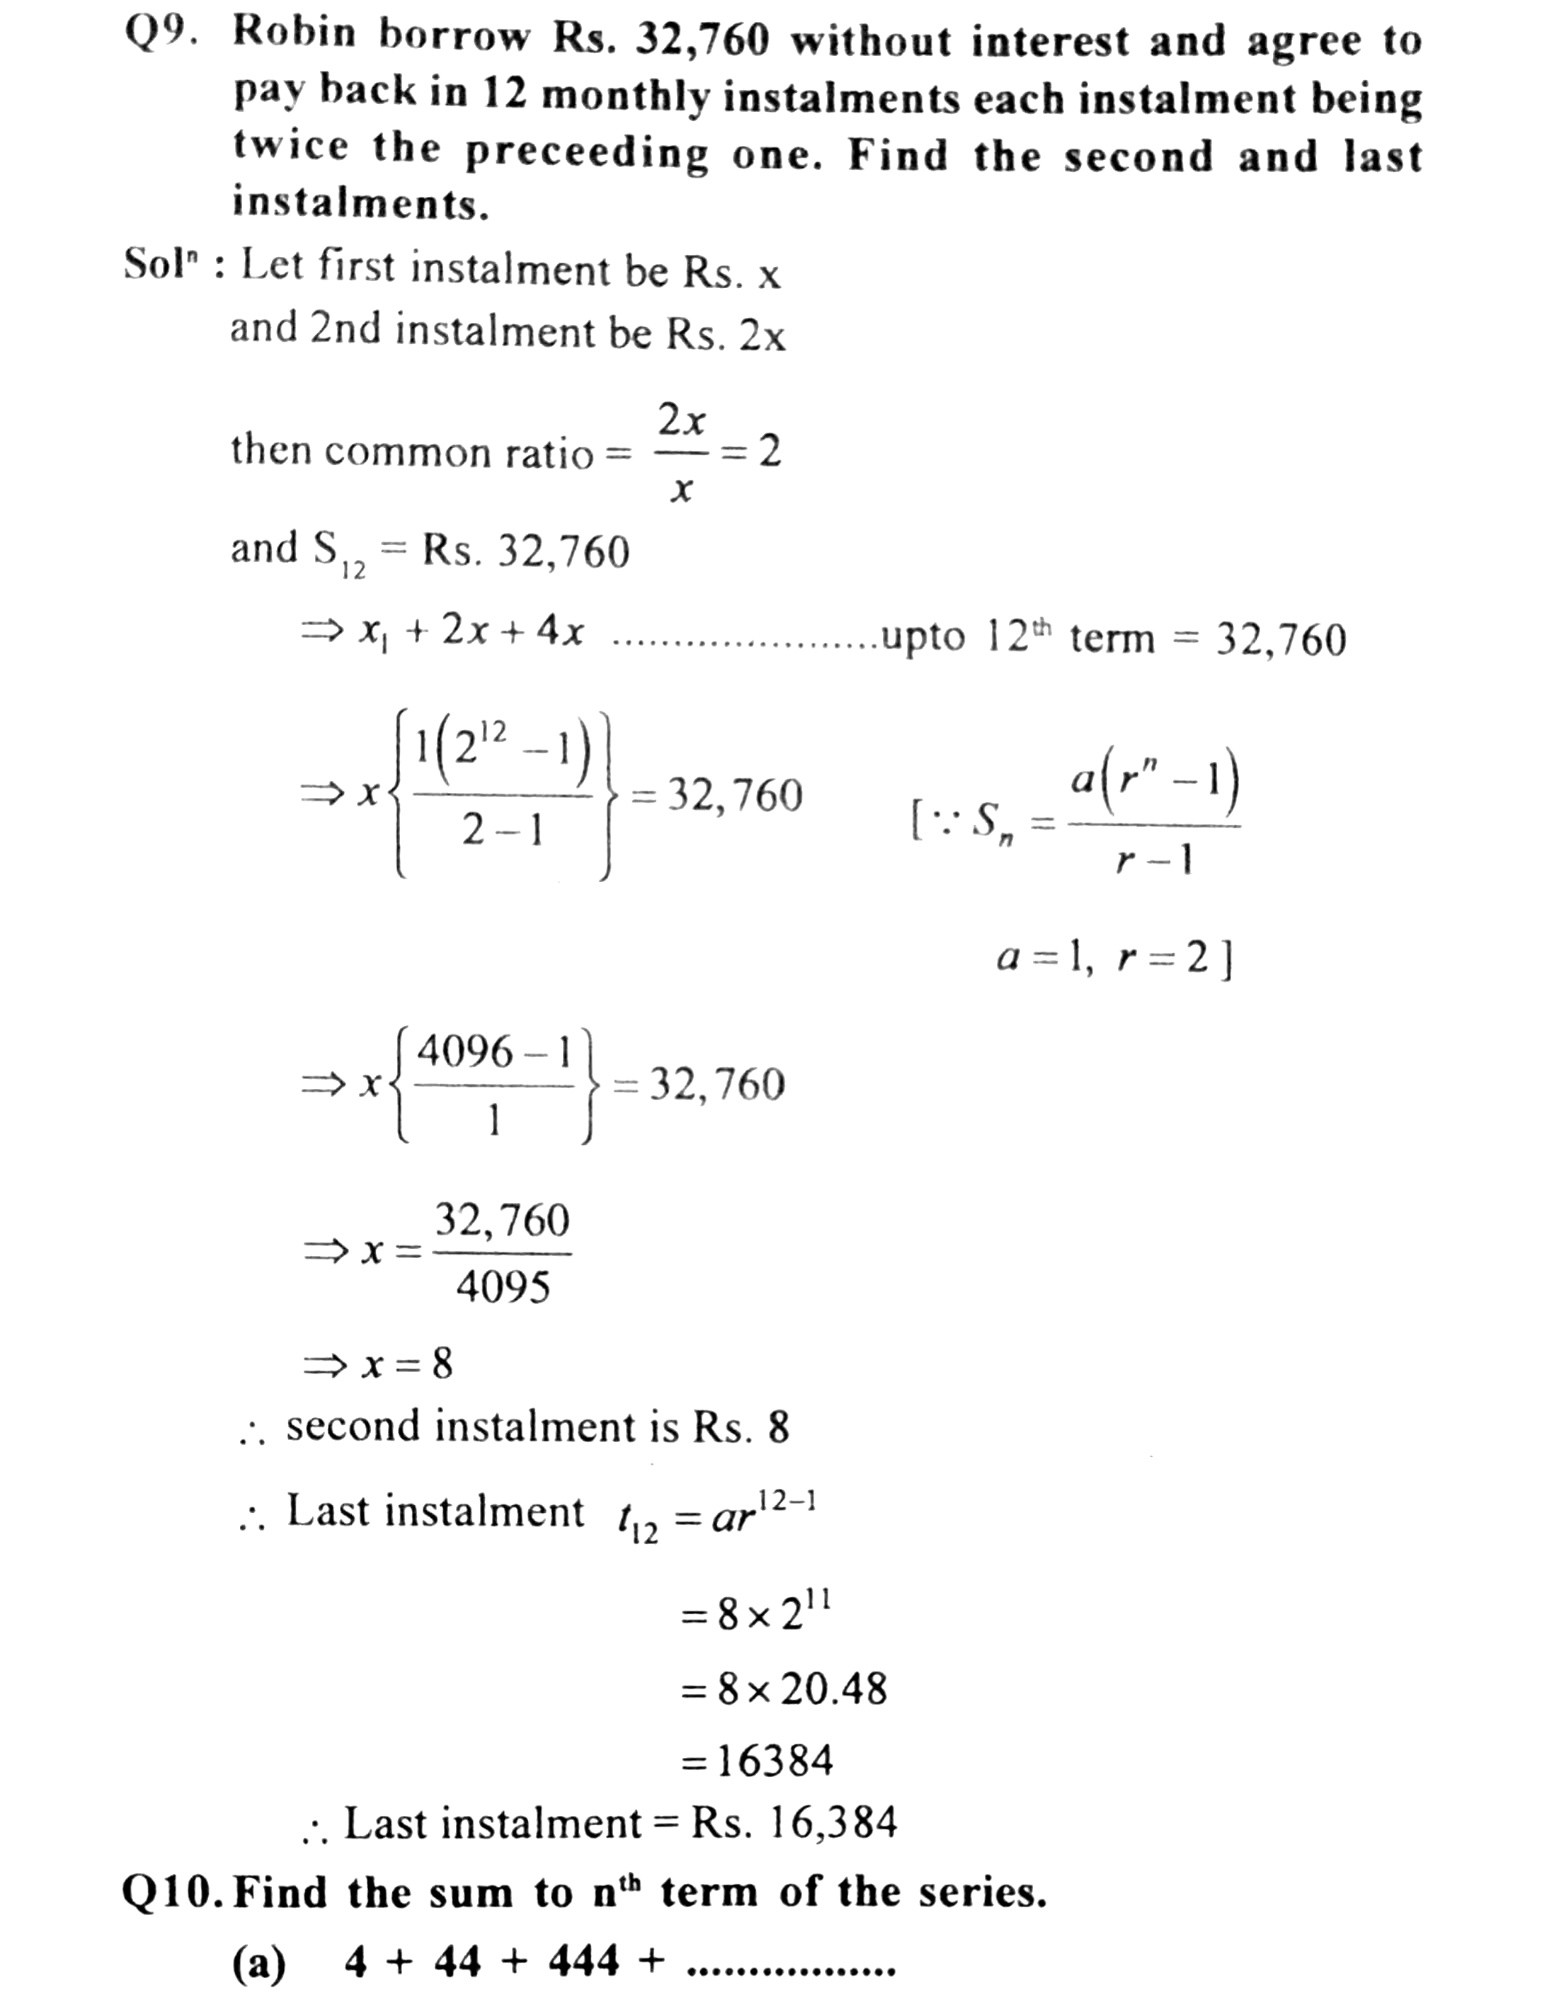 Arithmetic and geometric progression, gauhati University business mathematics Arithmetic and geometric progression unit 5 , b.com 4th sem business mathematics Unit 5 notes and solutions